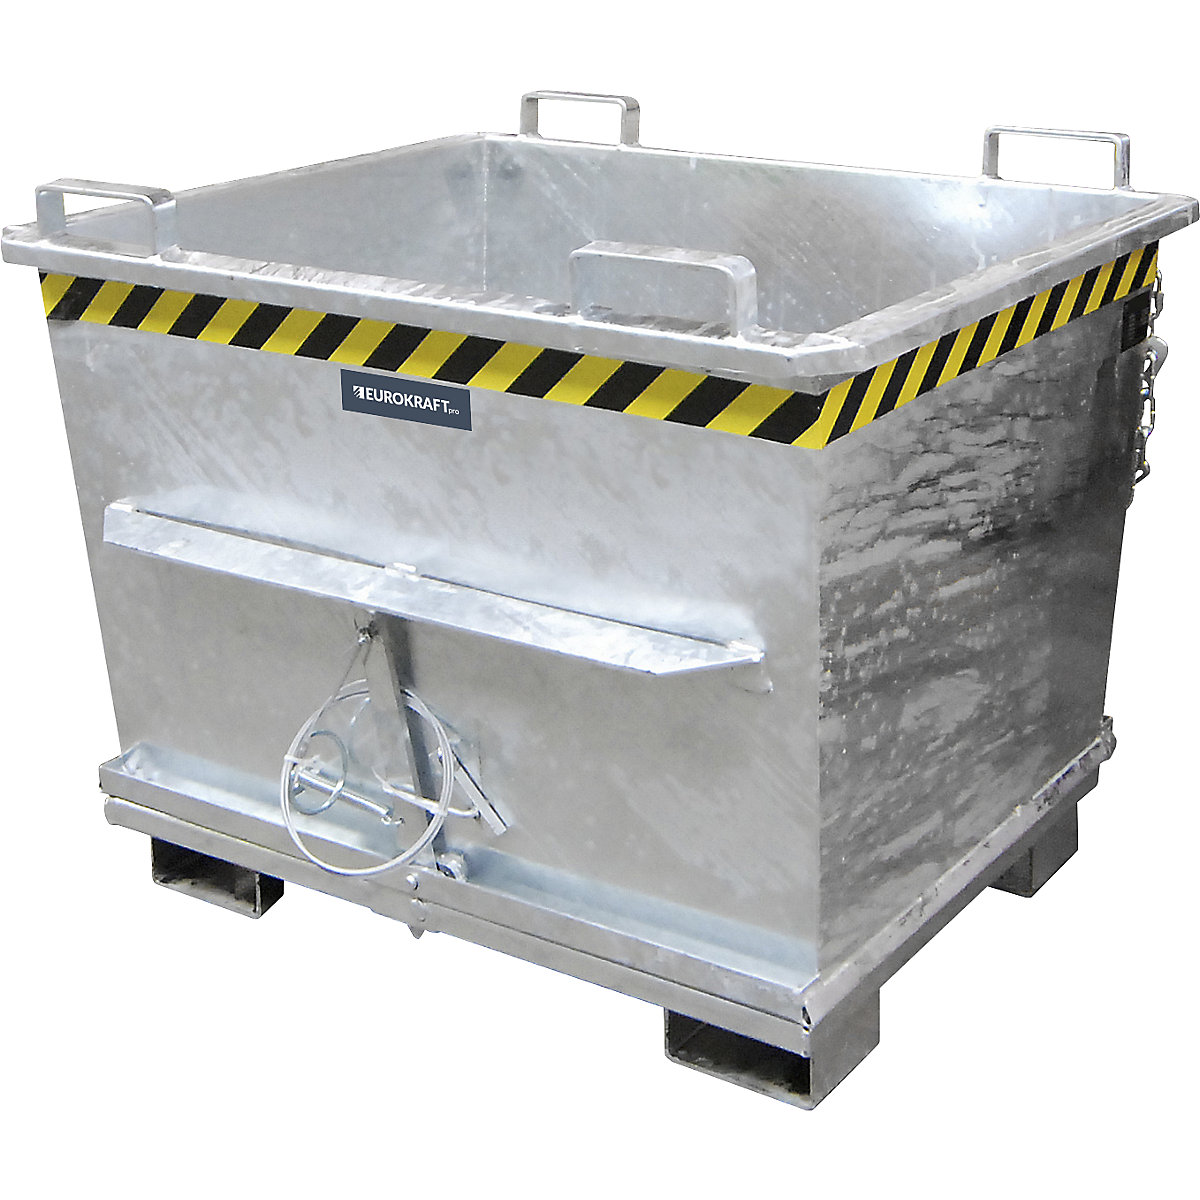 Conical hinged bottom skip – eurokraft pro, capacity 0.7 m³, max. load 1500 kg, hot dip galvanised in accordance with EN ISO 1461-16